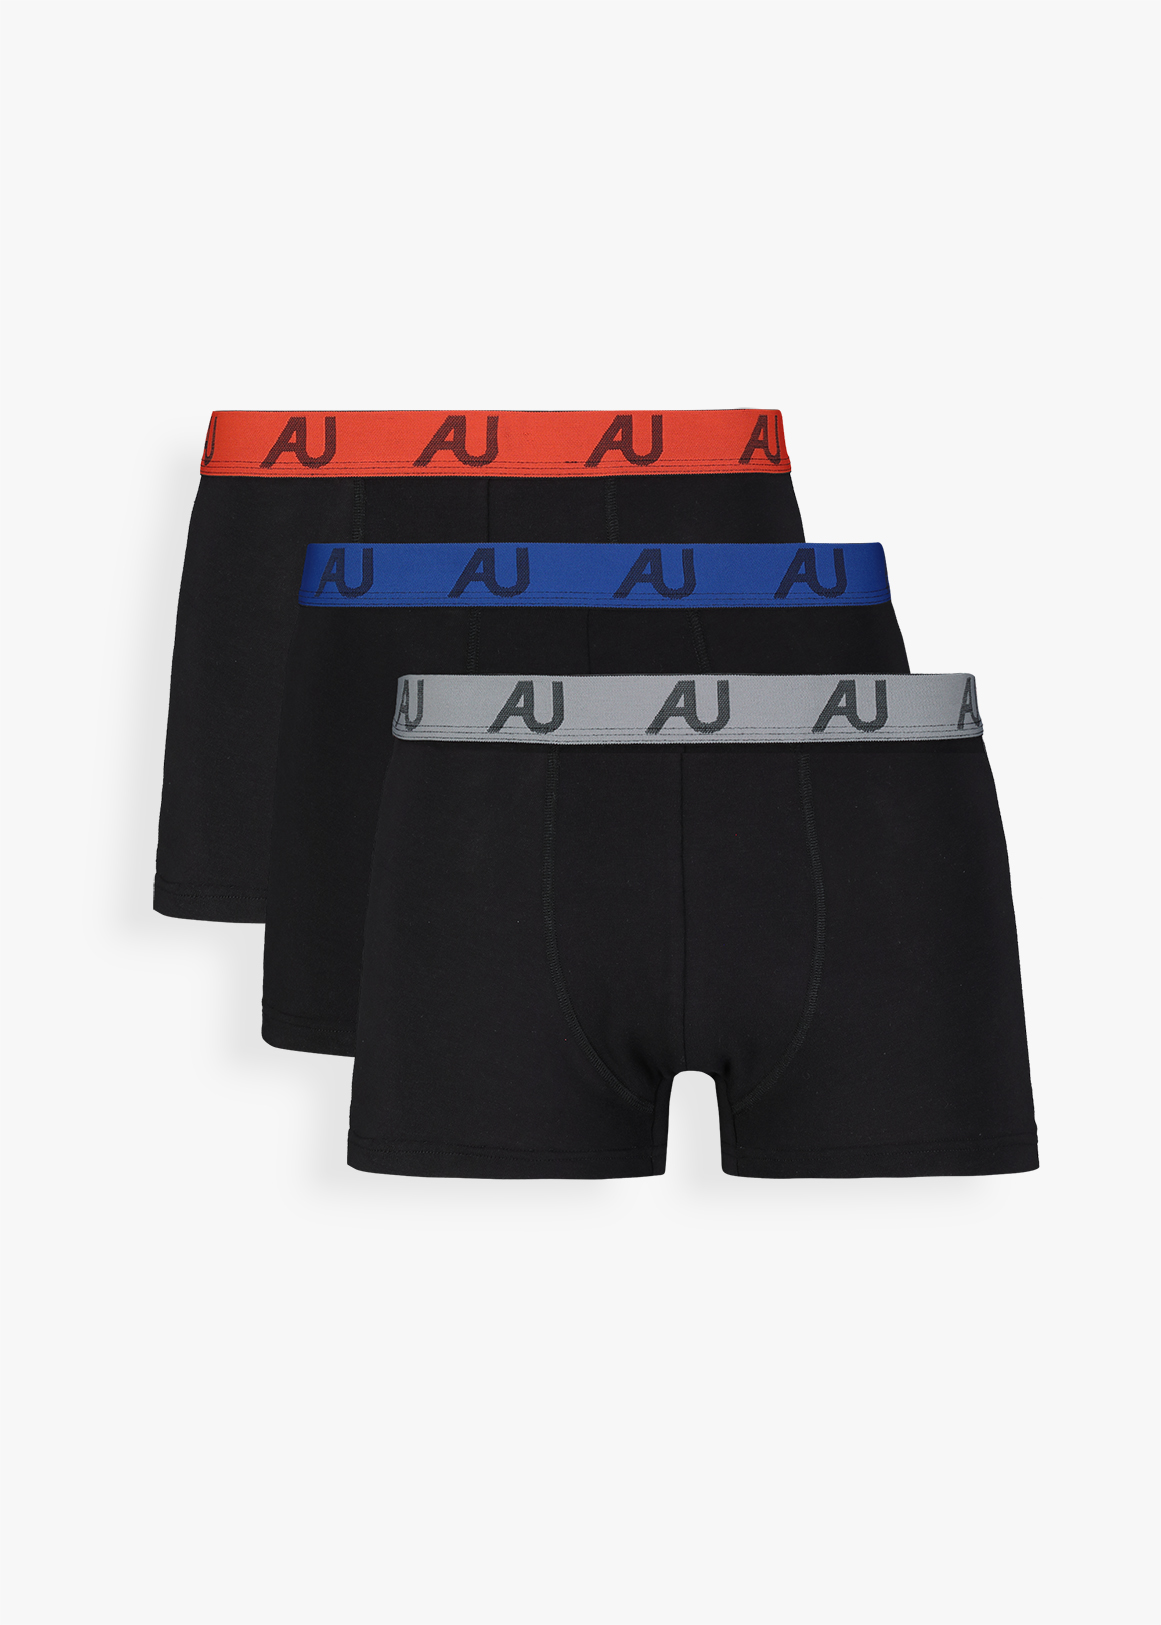 Men's Boxer Briefs Underpants,South African Flag Printed Mens Soft Underwear,Comfy  Breathable Short Trunk Black at  Men's Clothing store